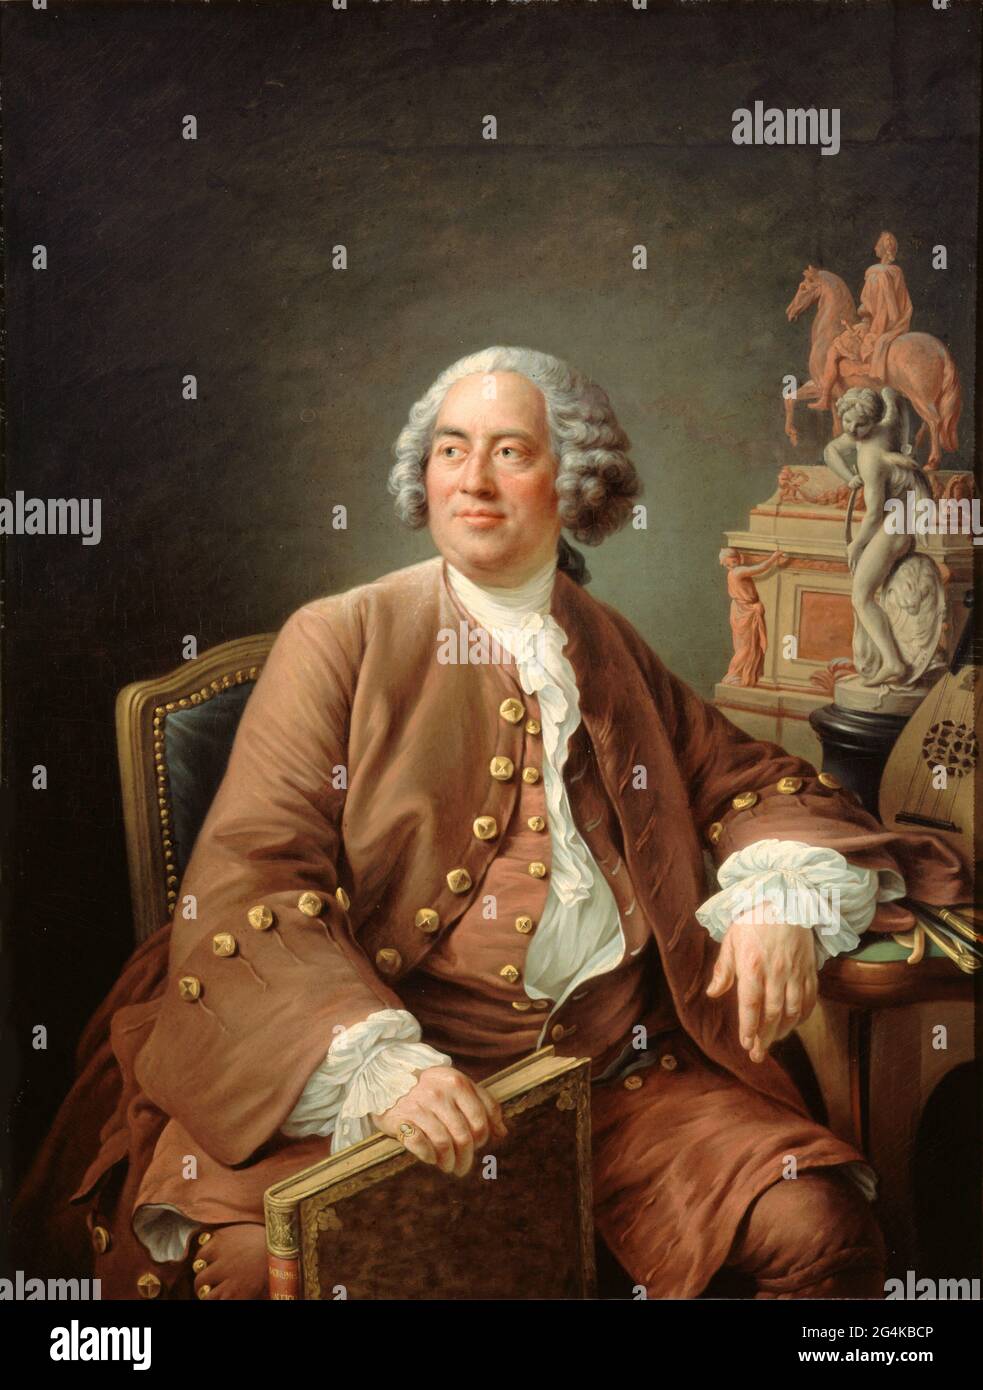 Portrait of the Architect Edm&#xe9; Bouchardon (1698-1762). Found in the collection of Mus&#xe9;e Carnavalet, Paris. Stock Photo